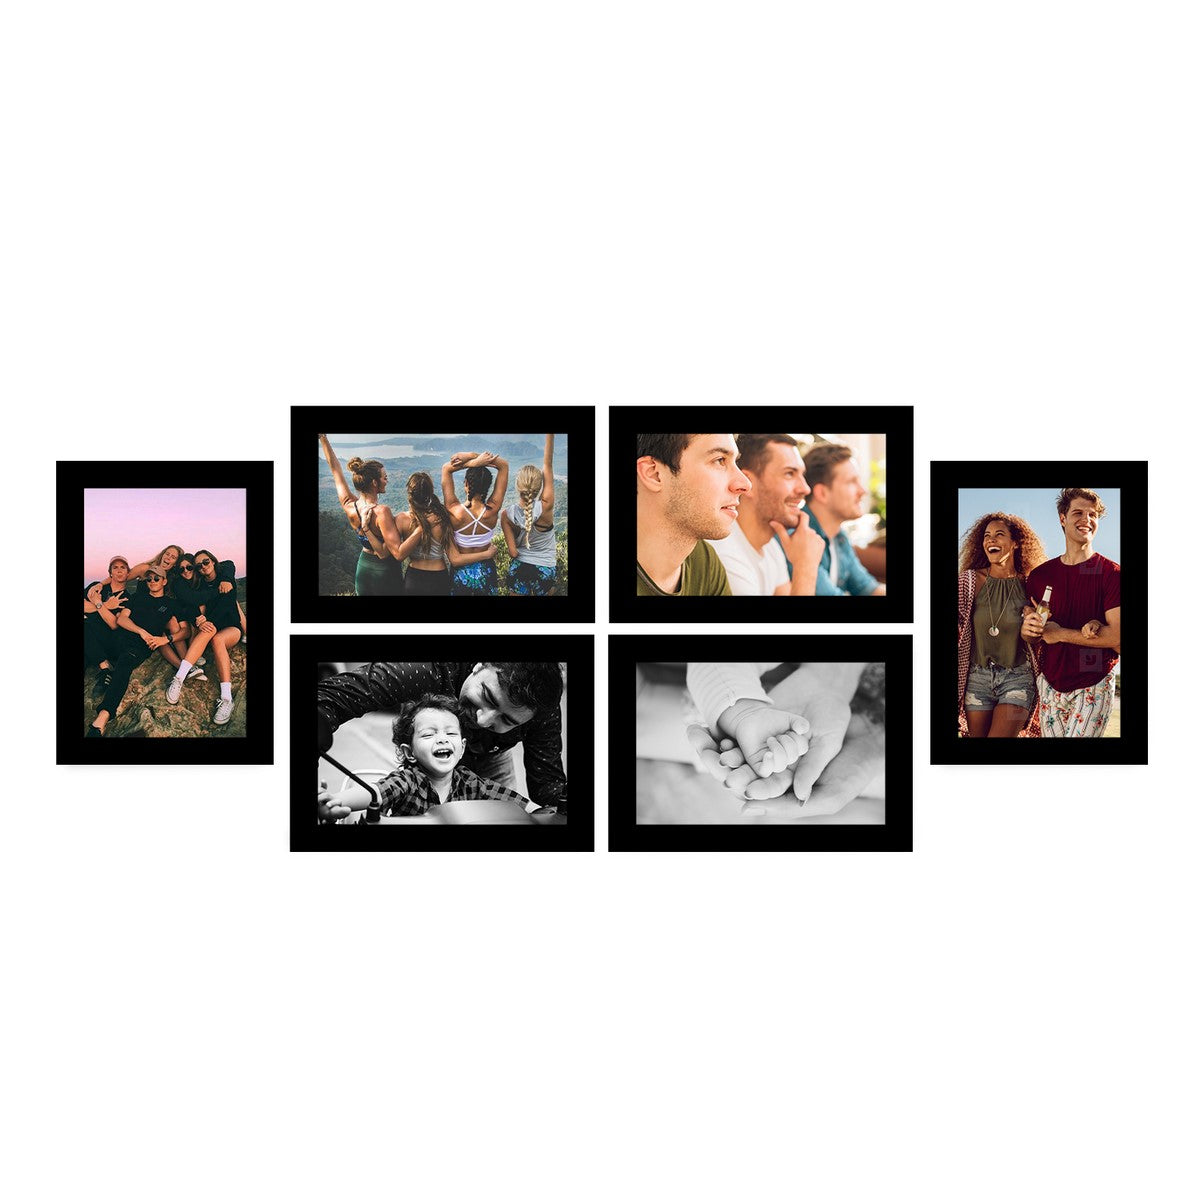 Memory Wall Collage Photo Frame - Set of 6 Photo Frames for 6 Photos of 5"x7"